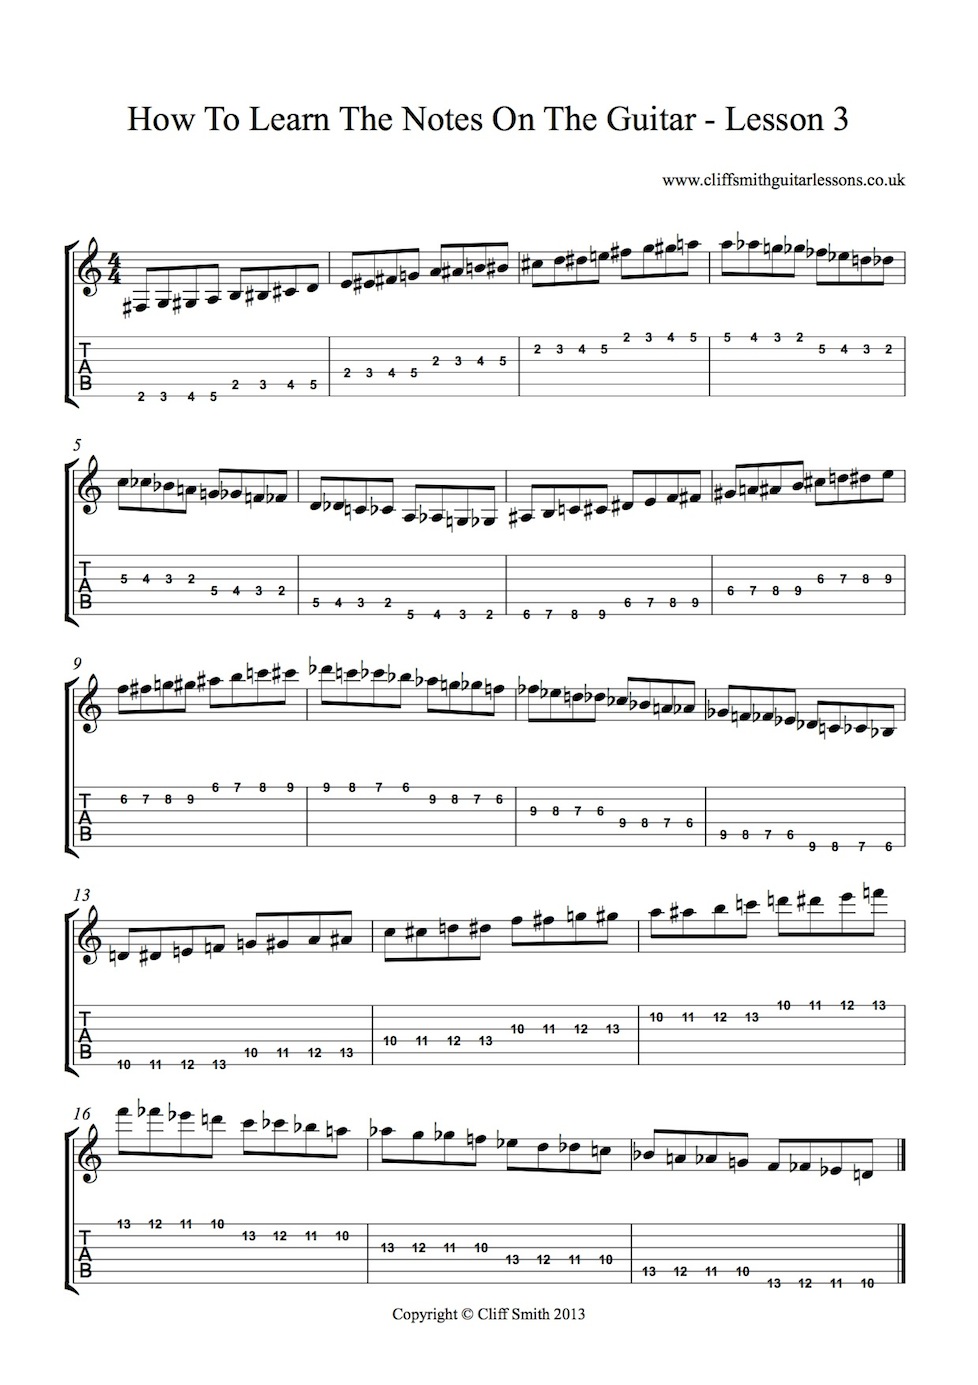 How to learn the notes on the guitar lesson 3 - Cliff Smith Guitar Lessons London